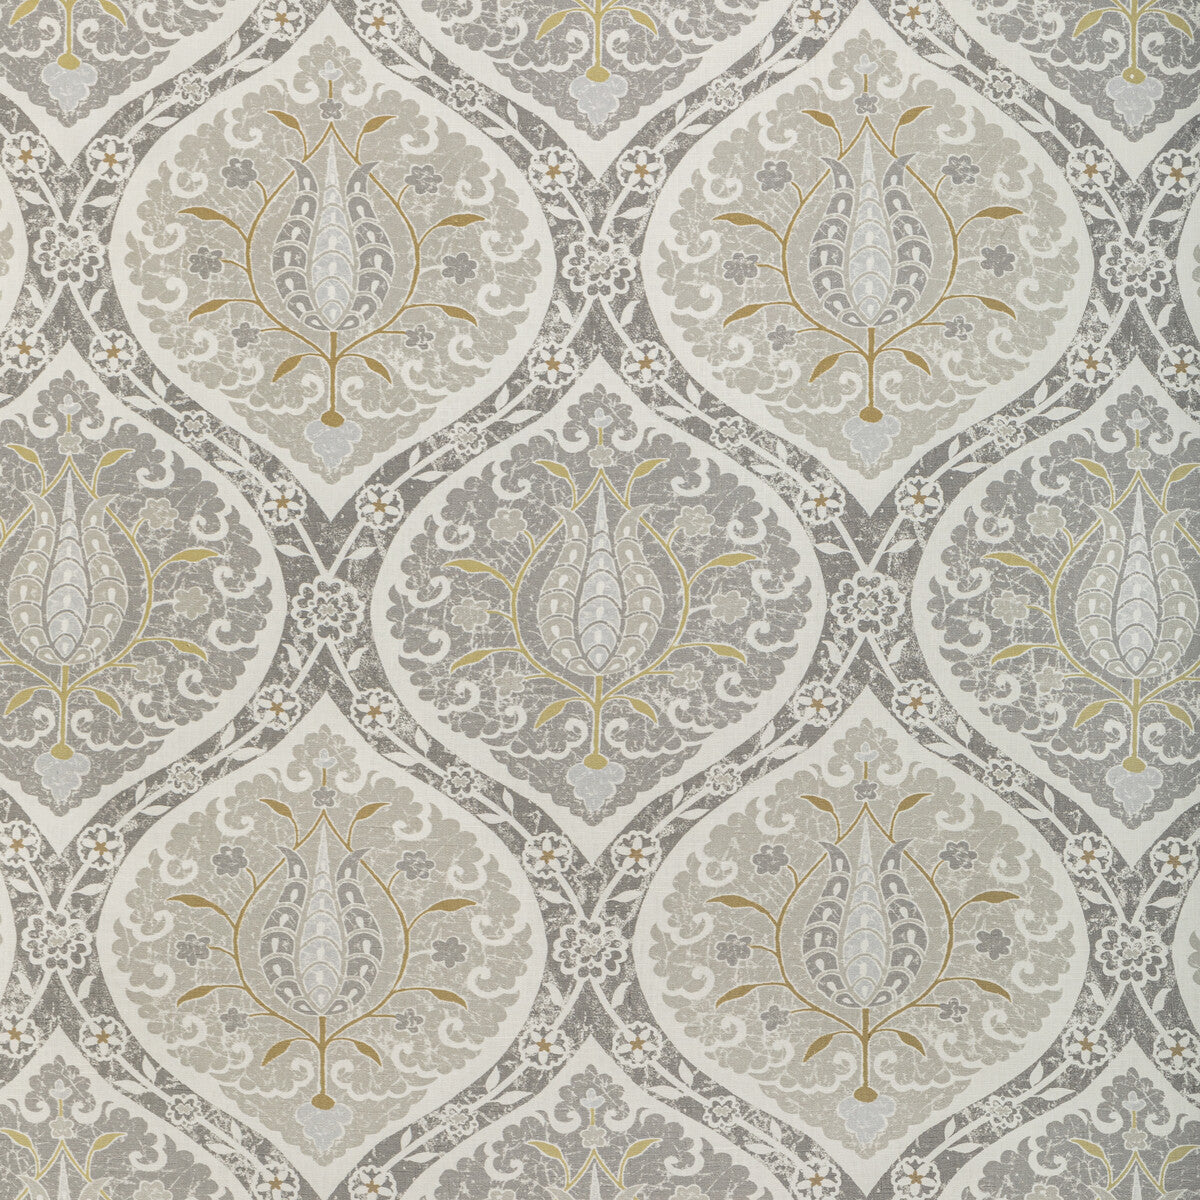 San Polo fabric in pewter color - pattern SAN POLO.11.0 - by Kravet Basics